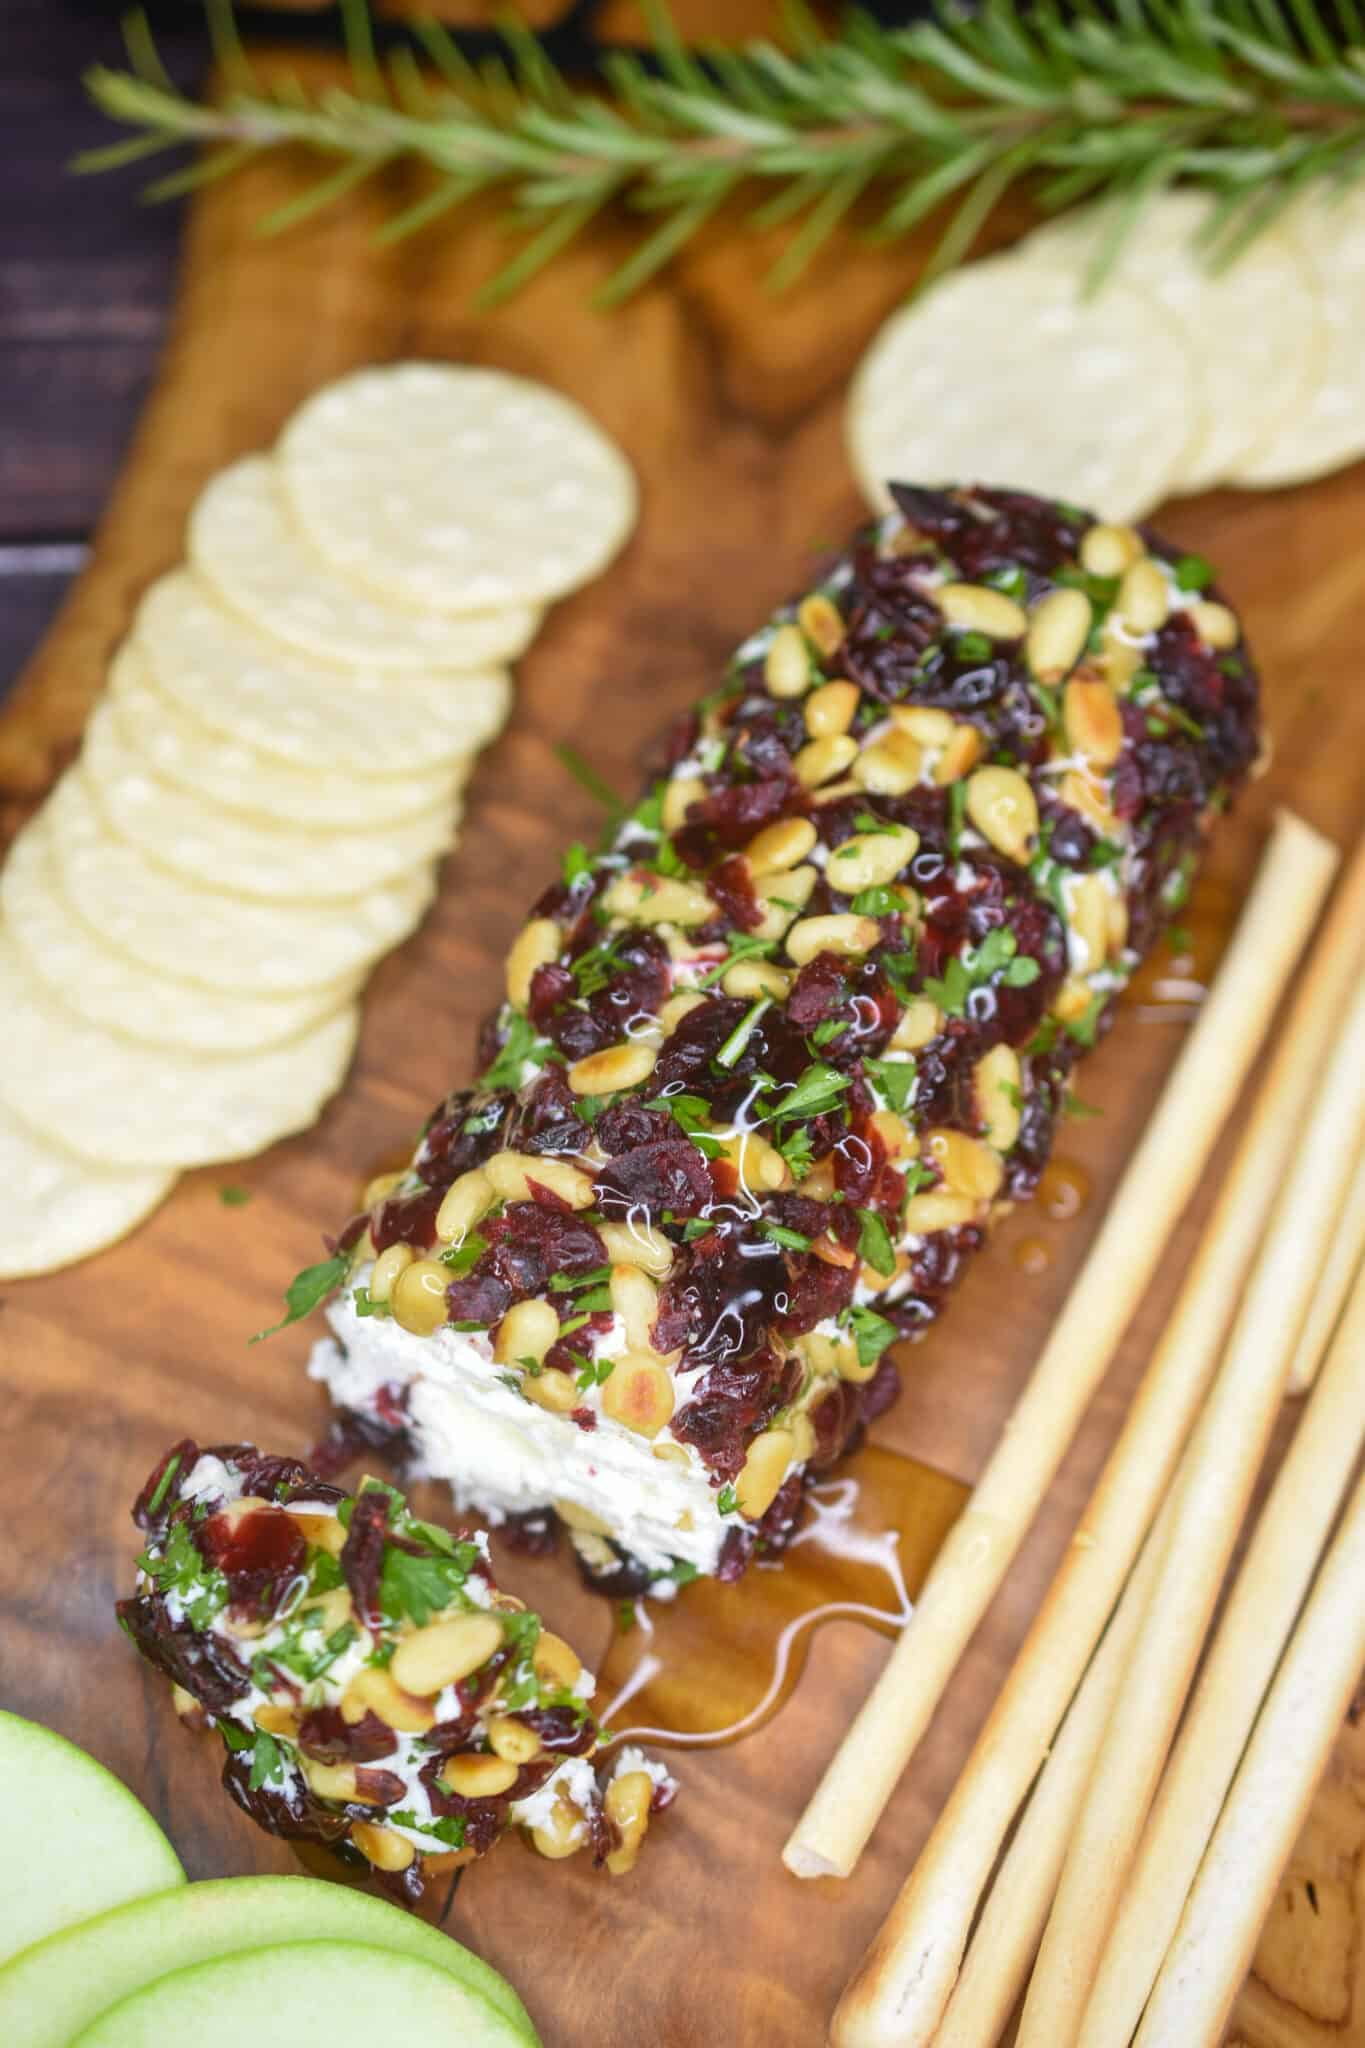 Goat cheese roll on a cutting board with crackers.